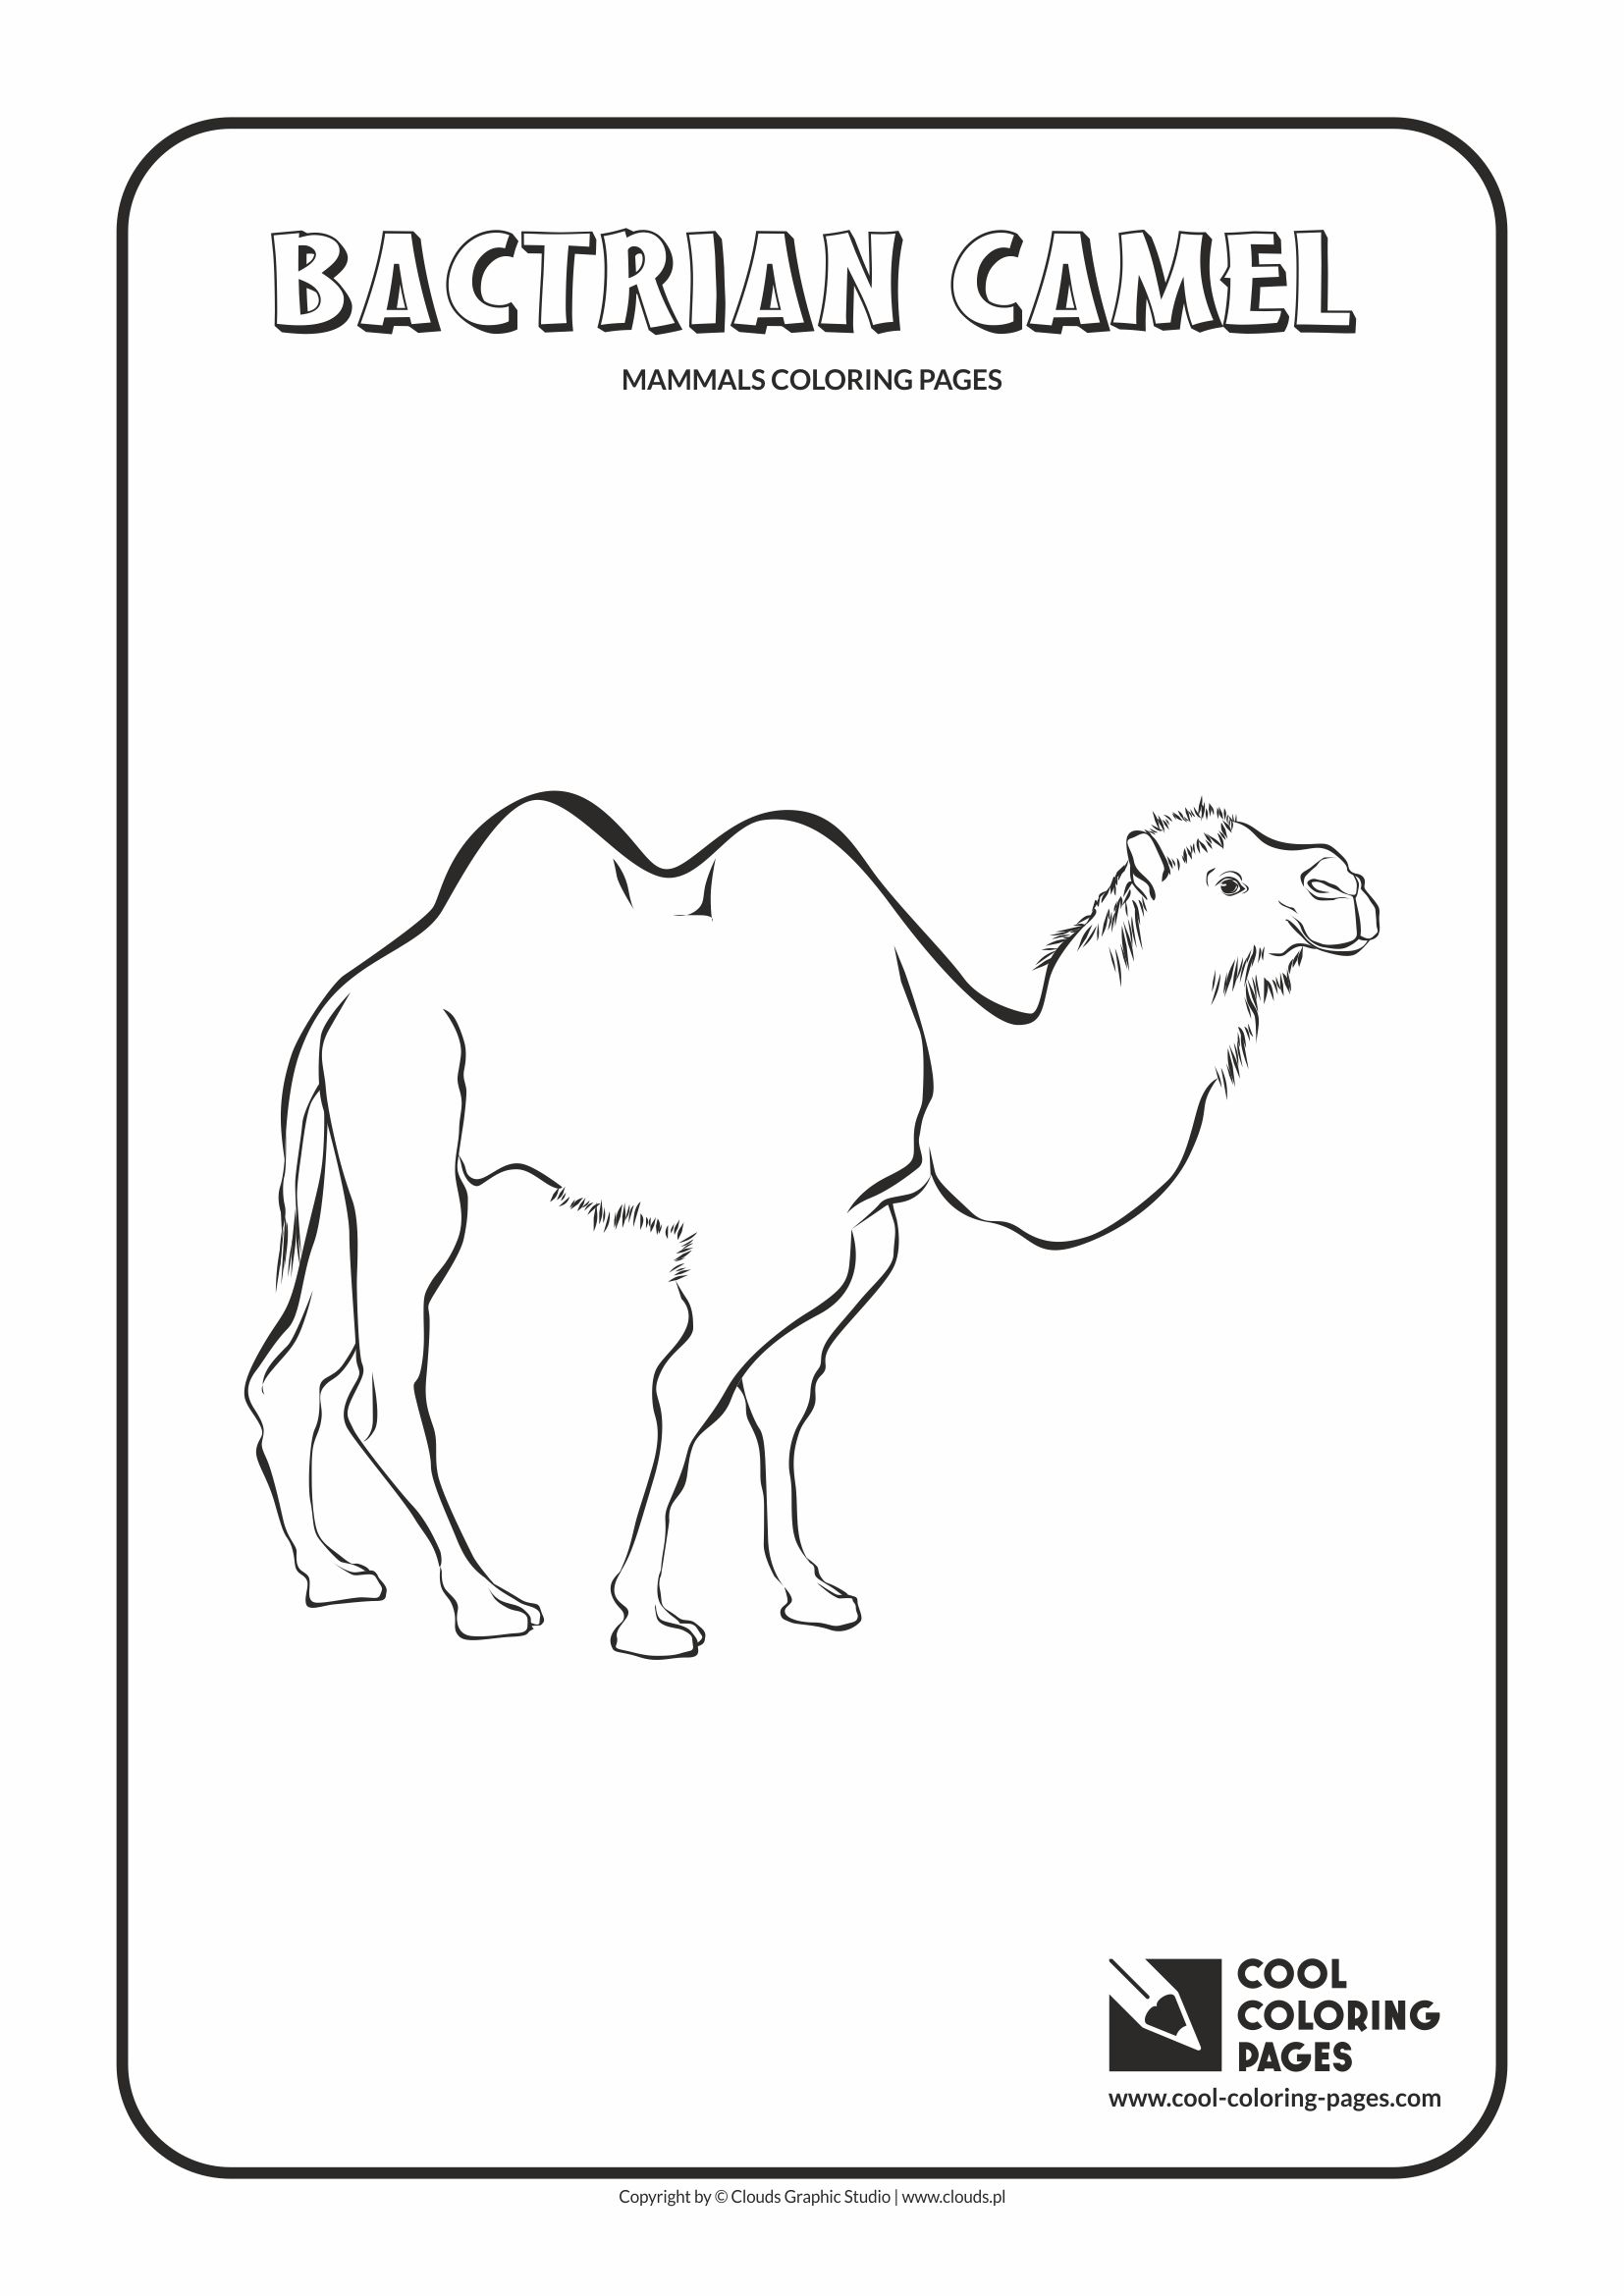 Cool Coloring Pages - Animals / Camel / Coloring page with camel